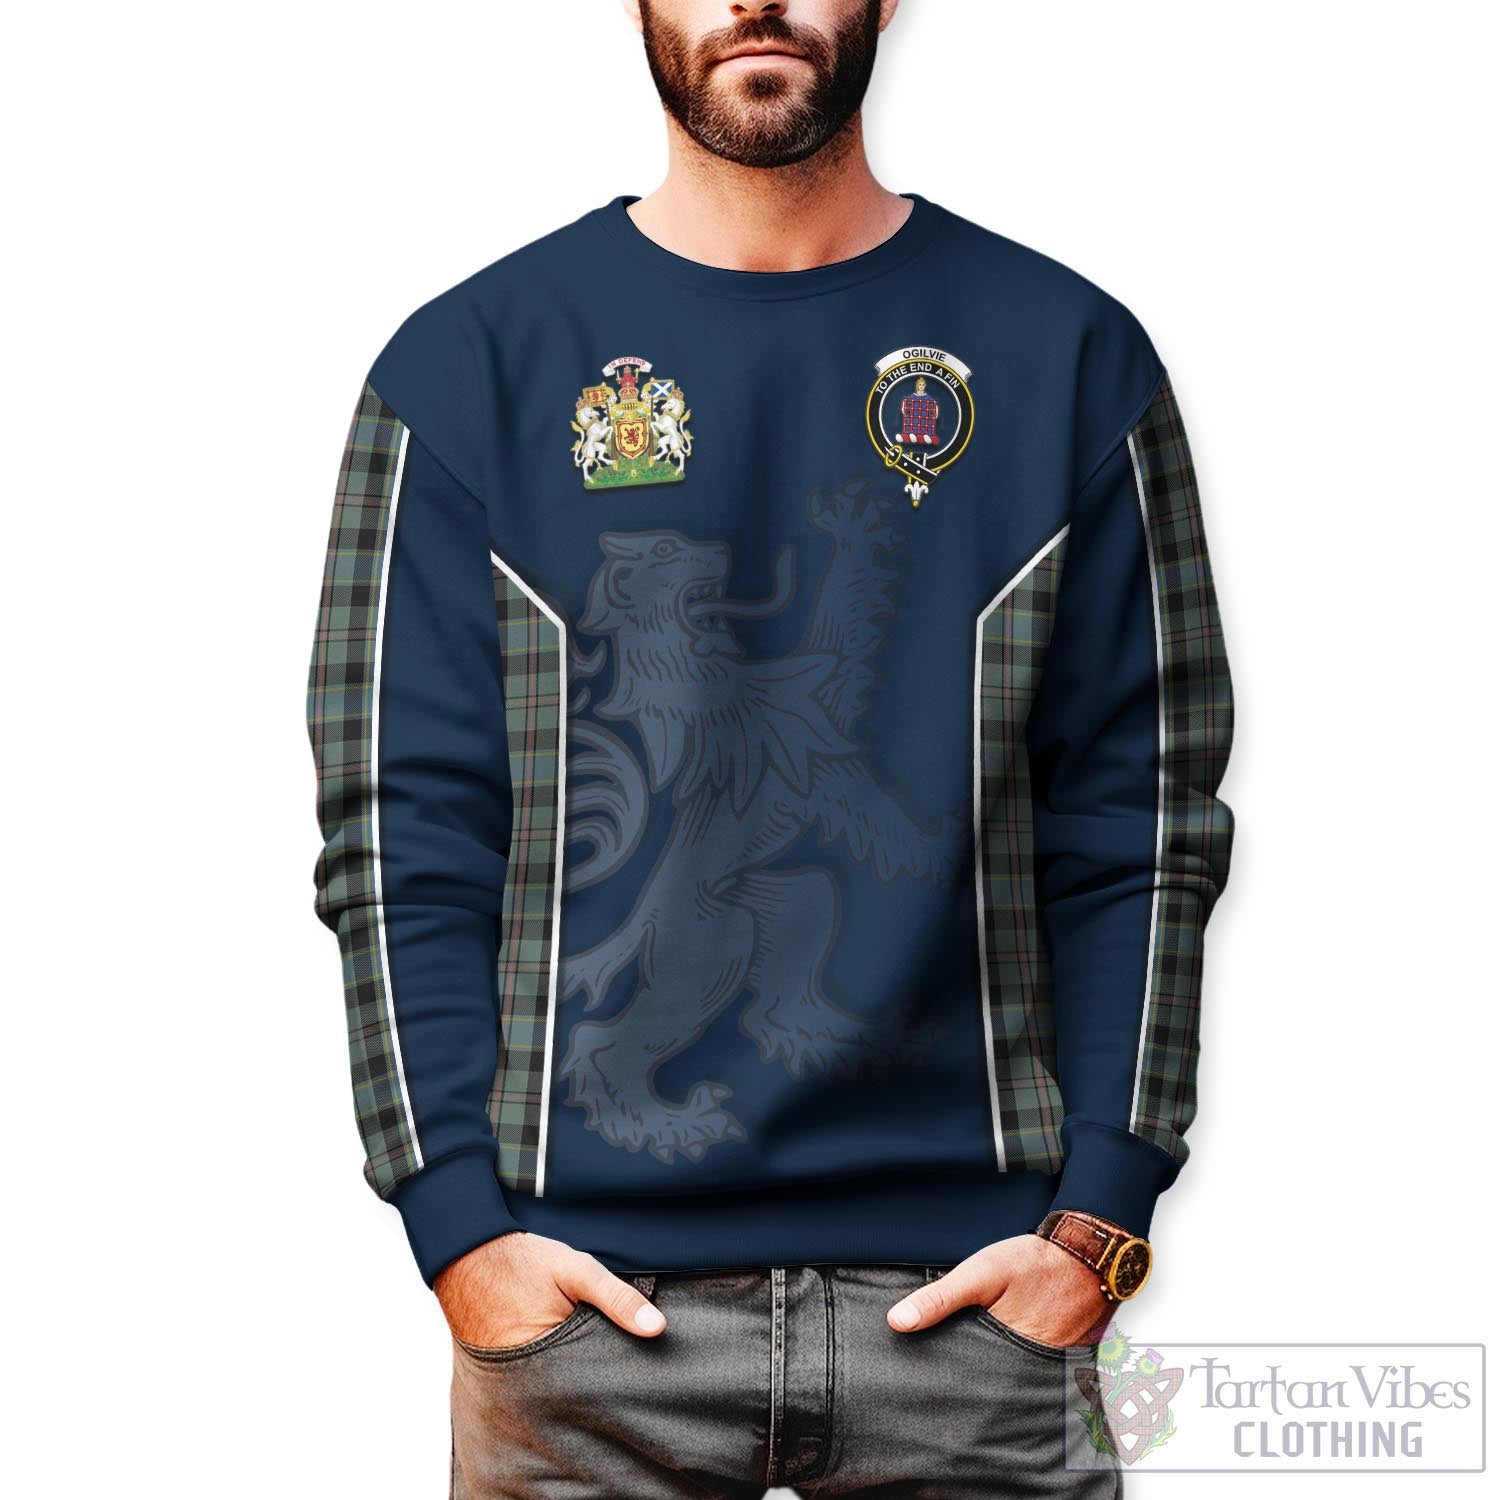 Tartan Vibes Clothing Ogilvie (Ogilvy) Hunting Tartan Sweater with Family Crest and Lion Rampant Vibes Sport Style